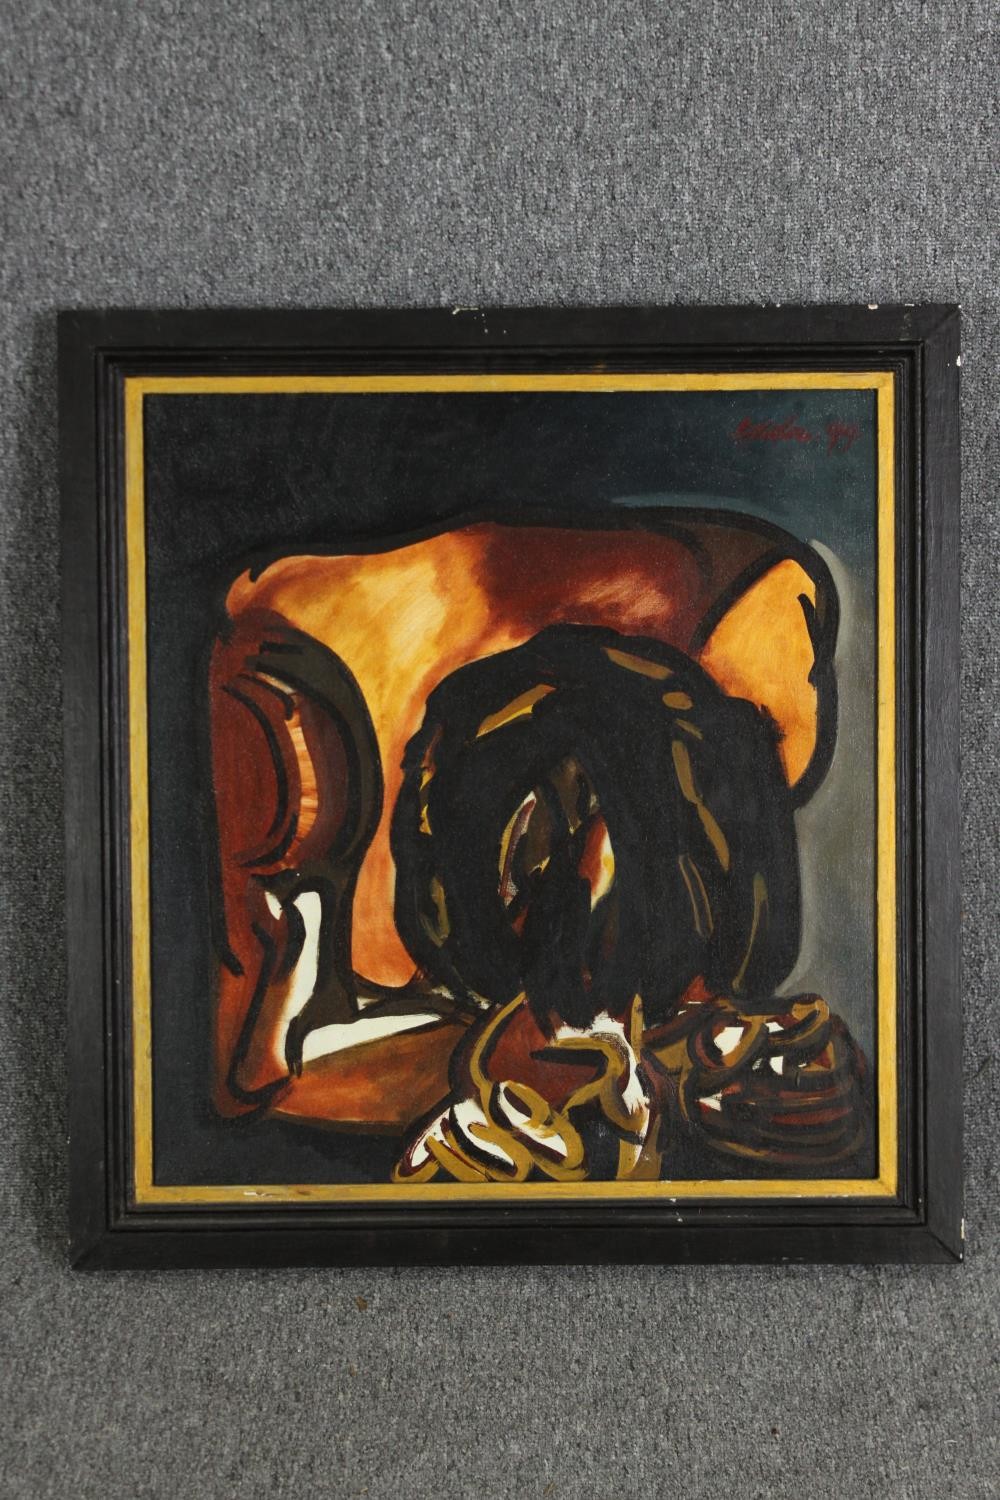 Hector Escobar, (1908 - 1984), oil on canvas abstract composition signed and dated 99. Framed. H. - Image 2 of 4